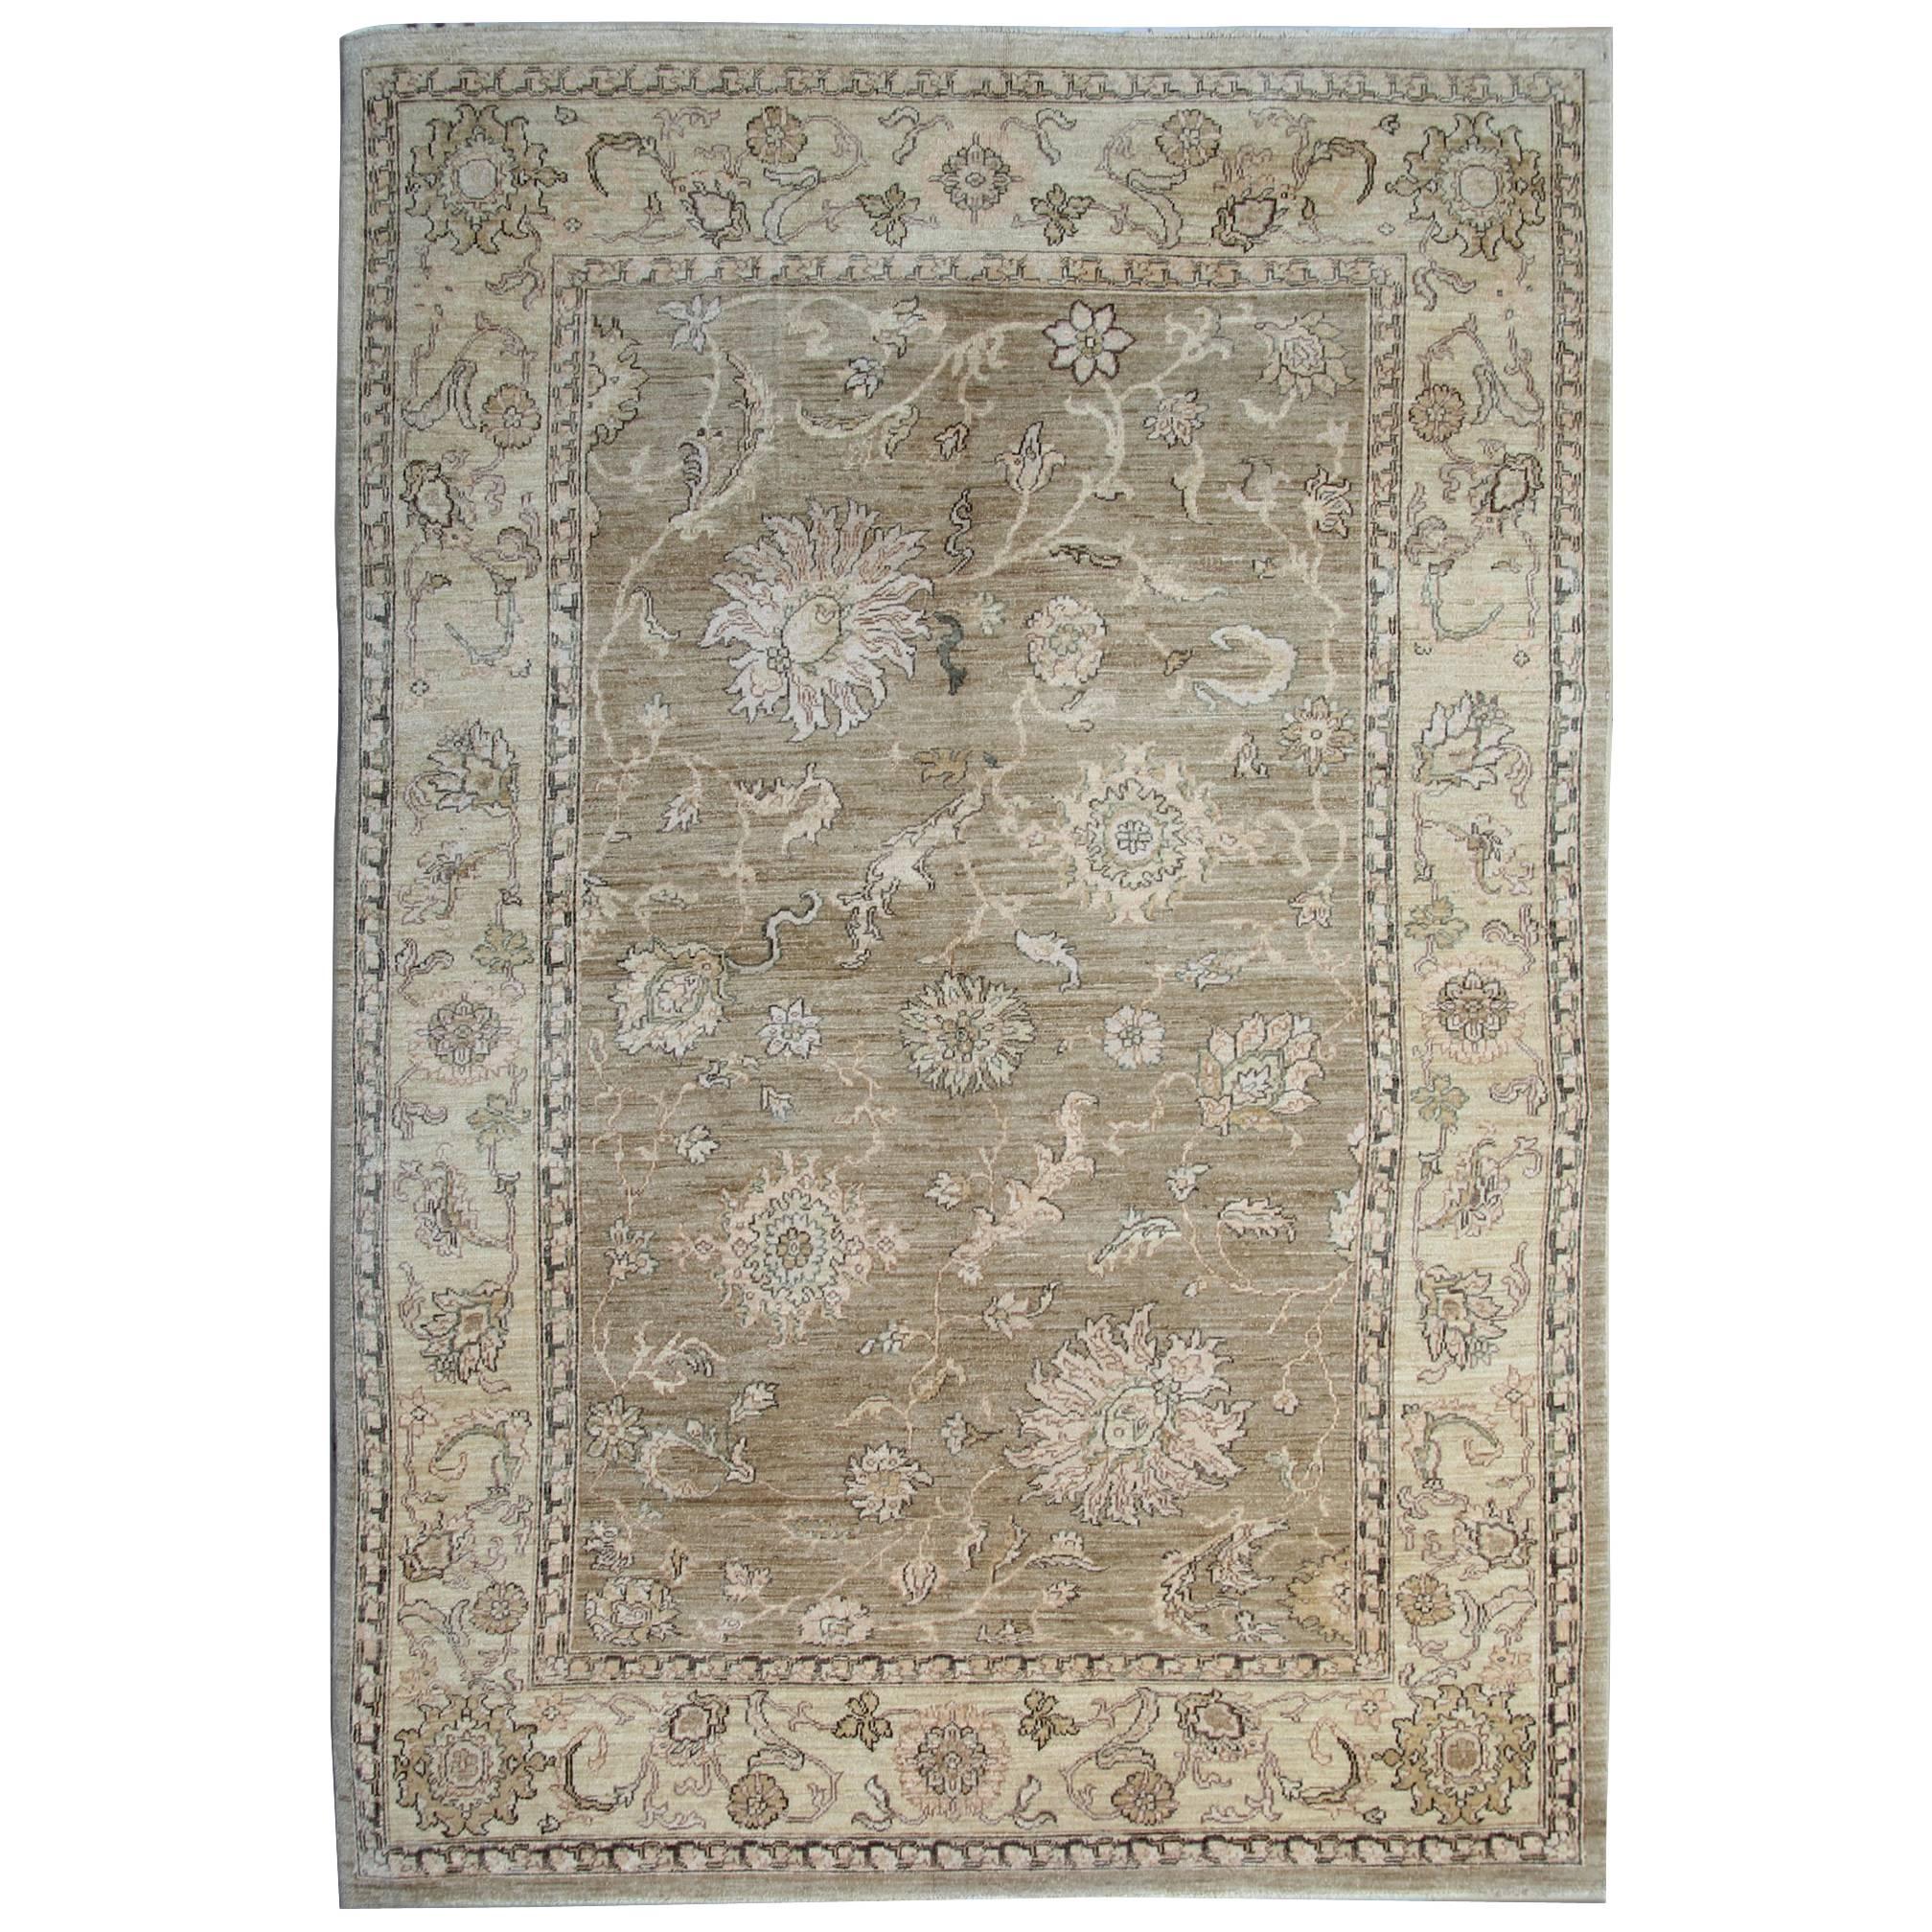 Brown Oriental Rug, Ziegler Style Living Room Rugs Hand Made Rugs for Sale For Sale